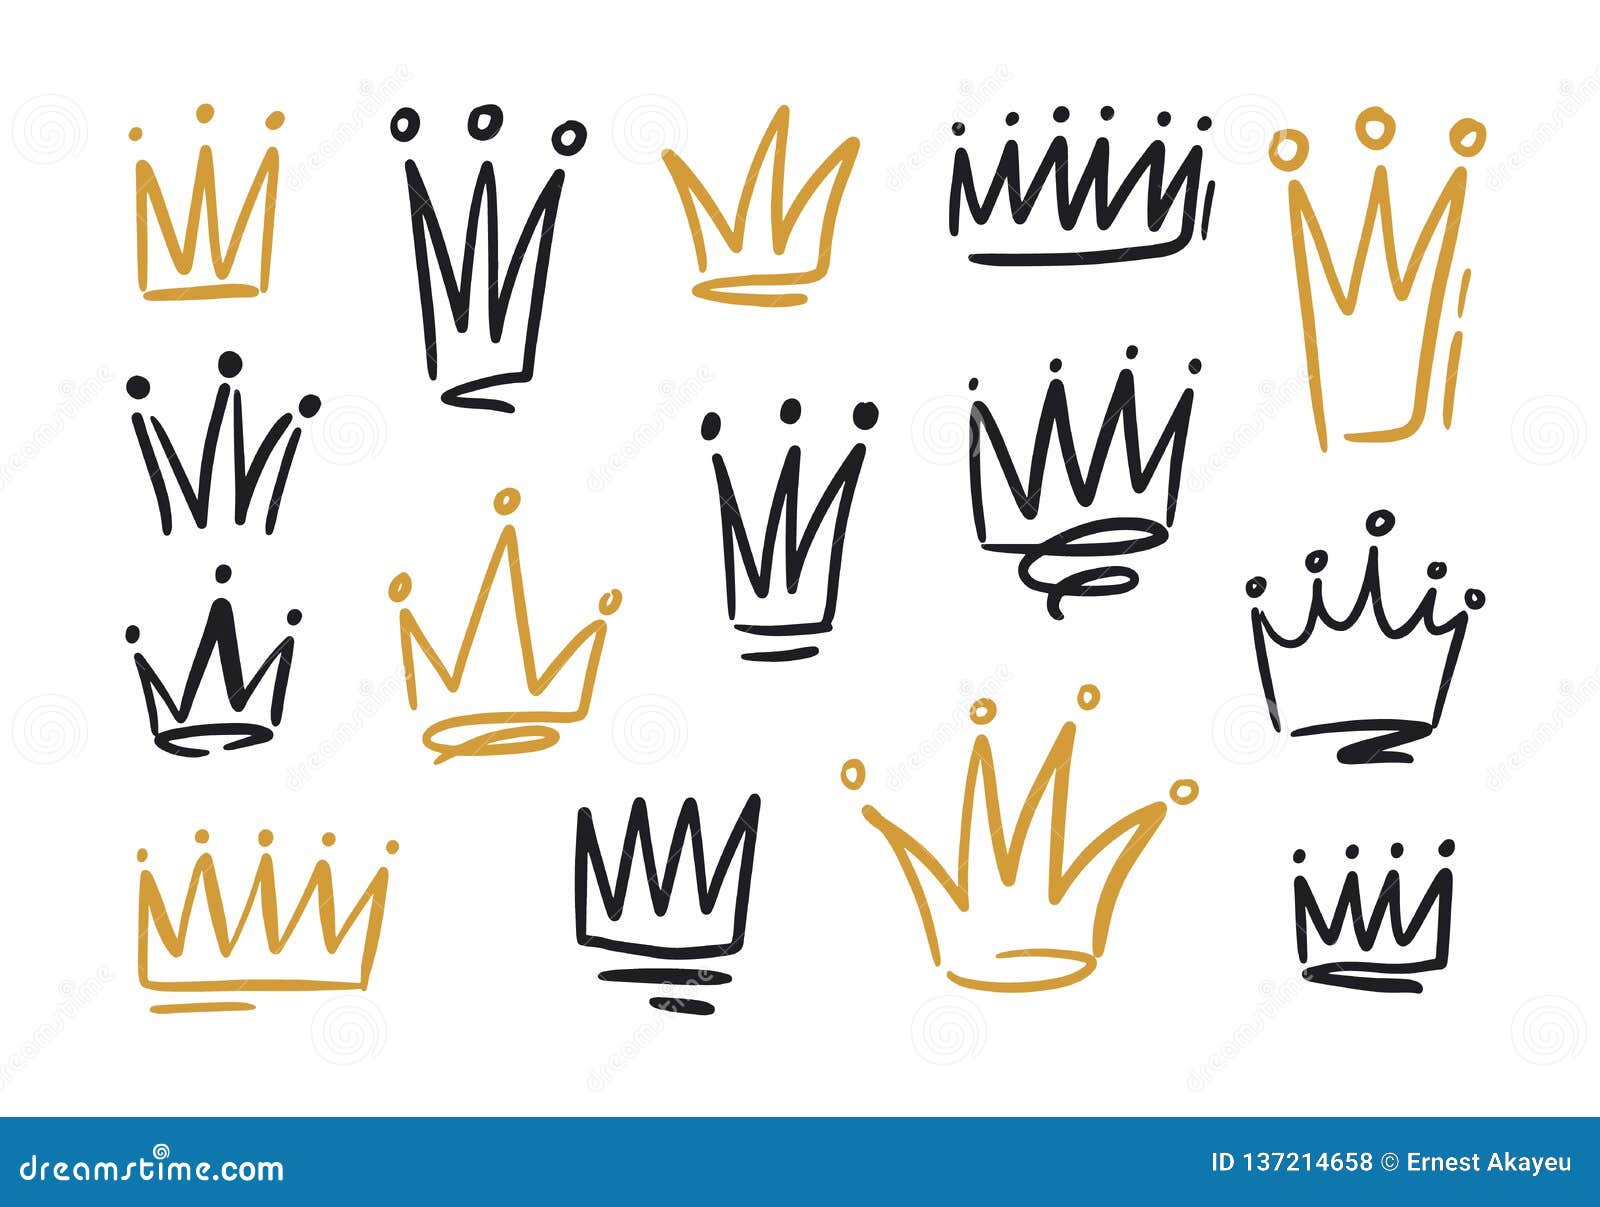 Bundle Of Drawings Of Crowns Or Coronets For King Or Queen